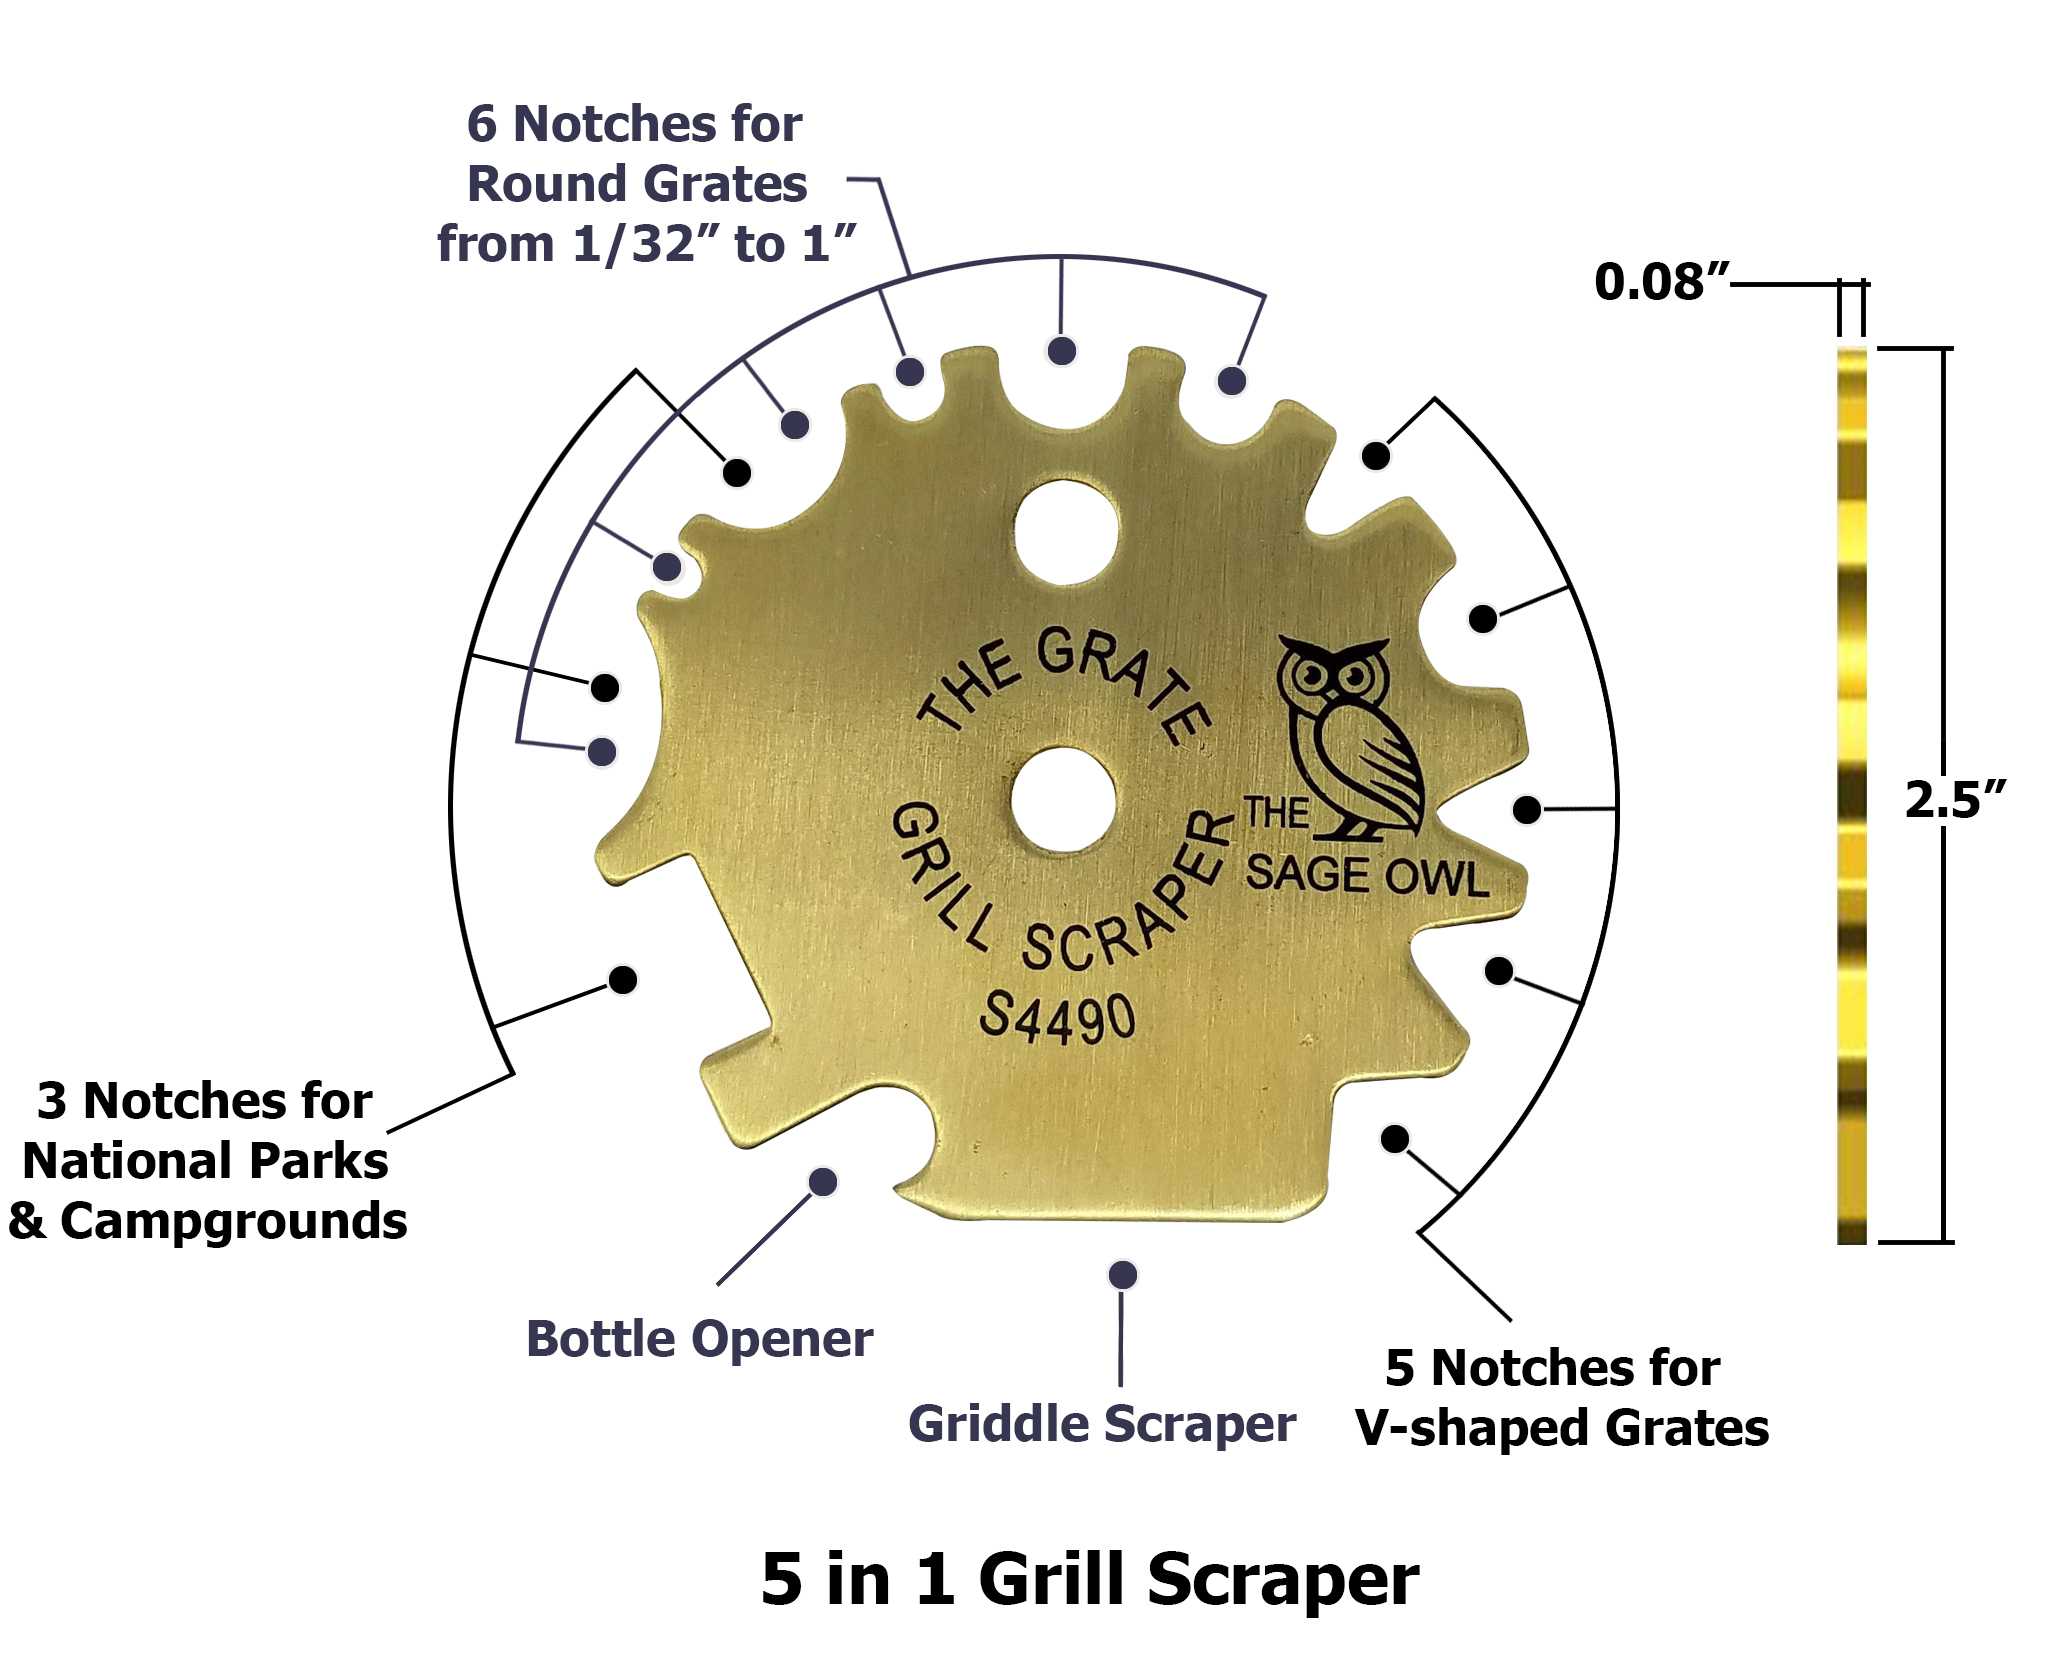 S4490 - The Grate Grill Scraper - Brass Barbeque Cleaner